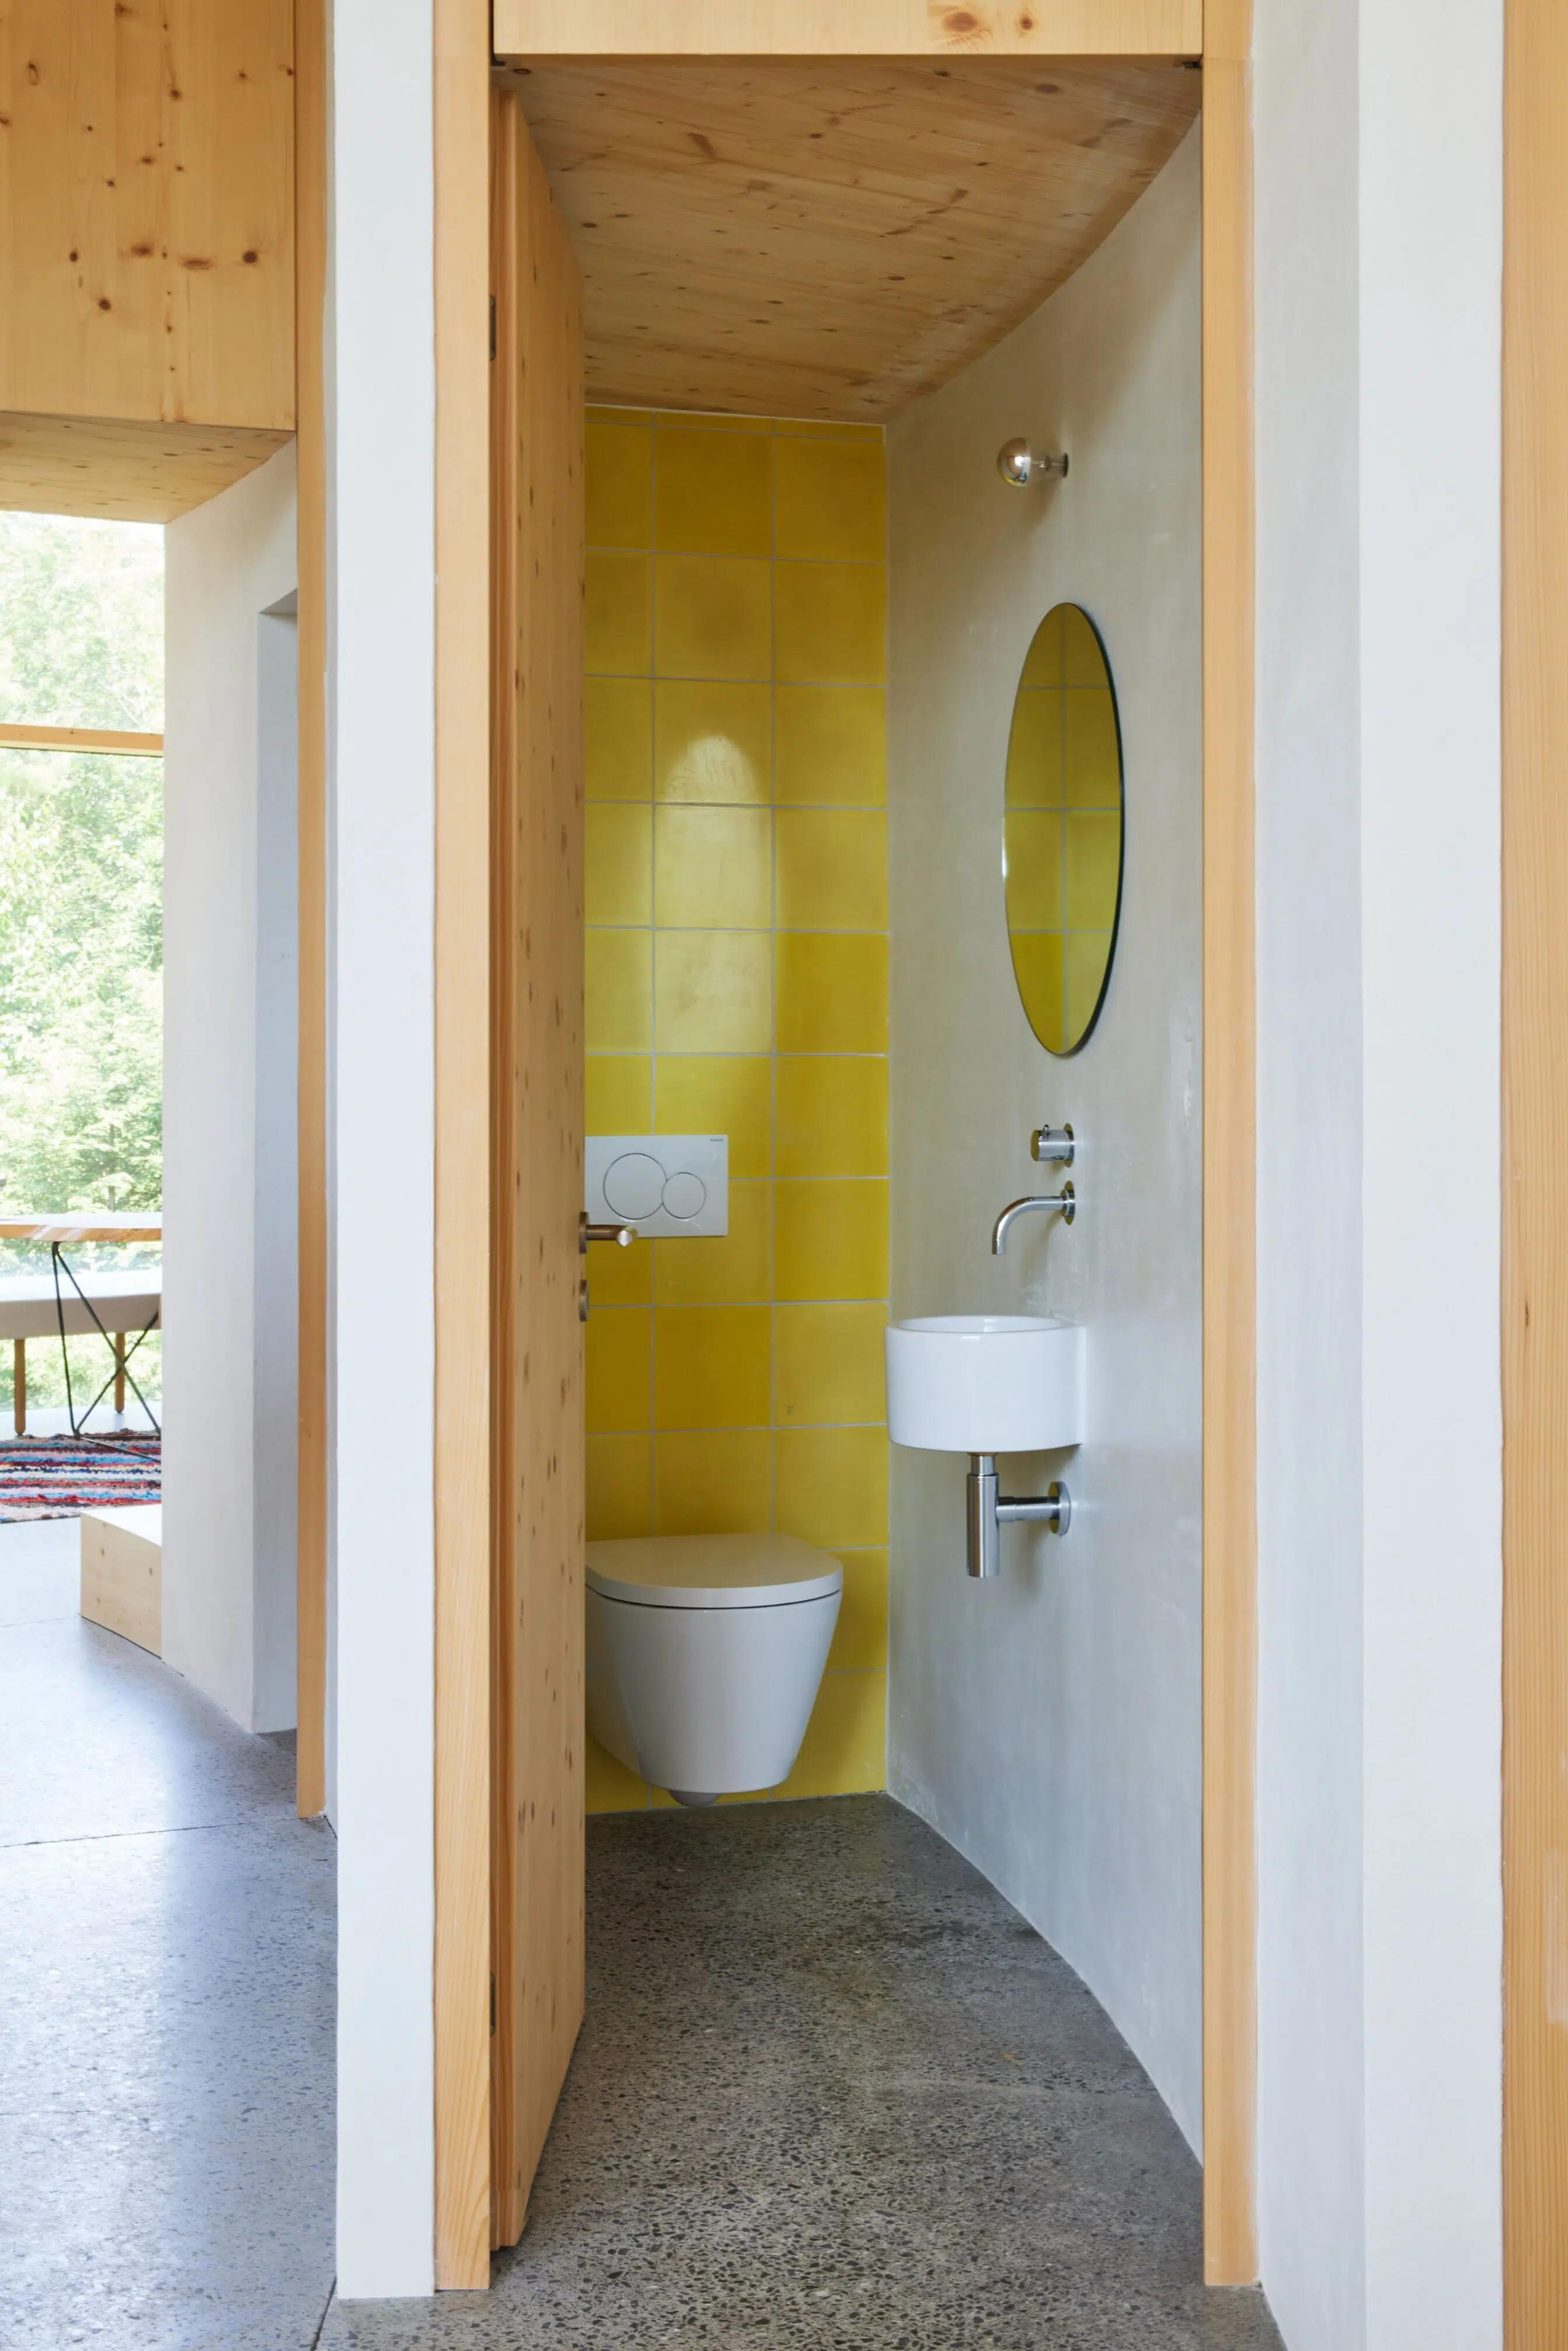 30 Space Rental Interior Powder Room with yellow walls scaled.jpg